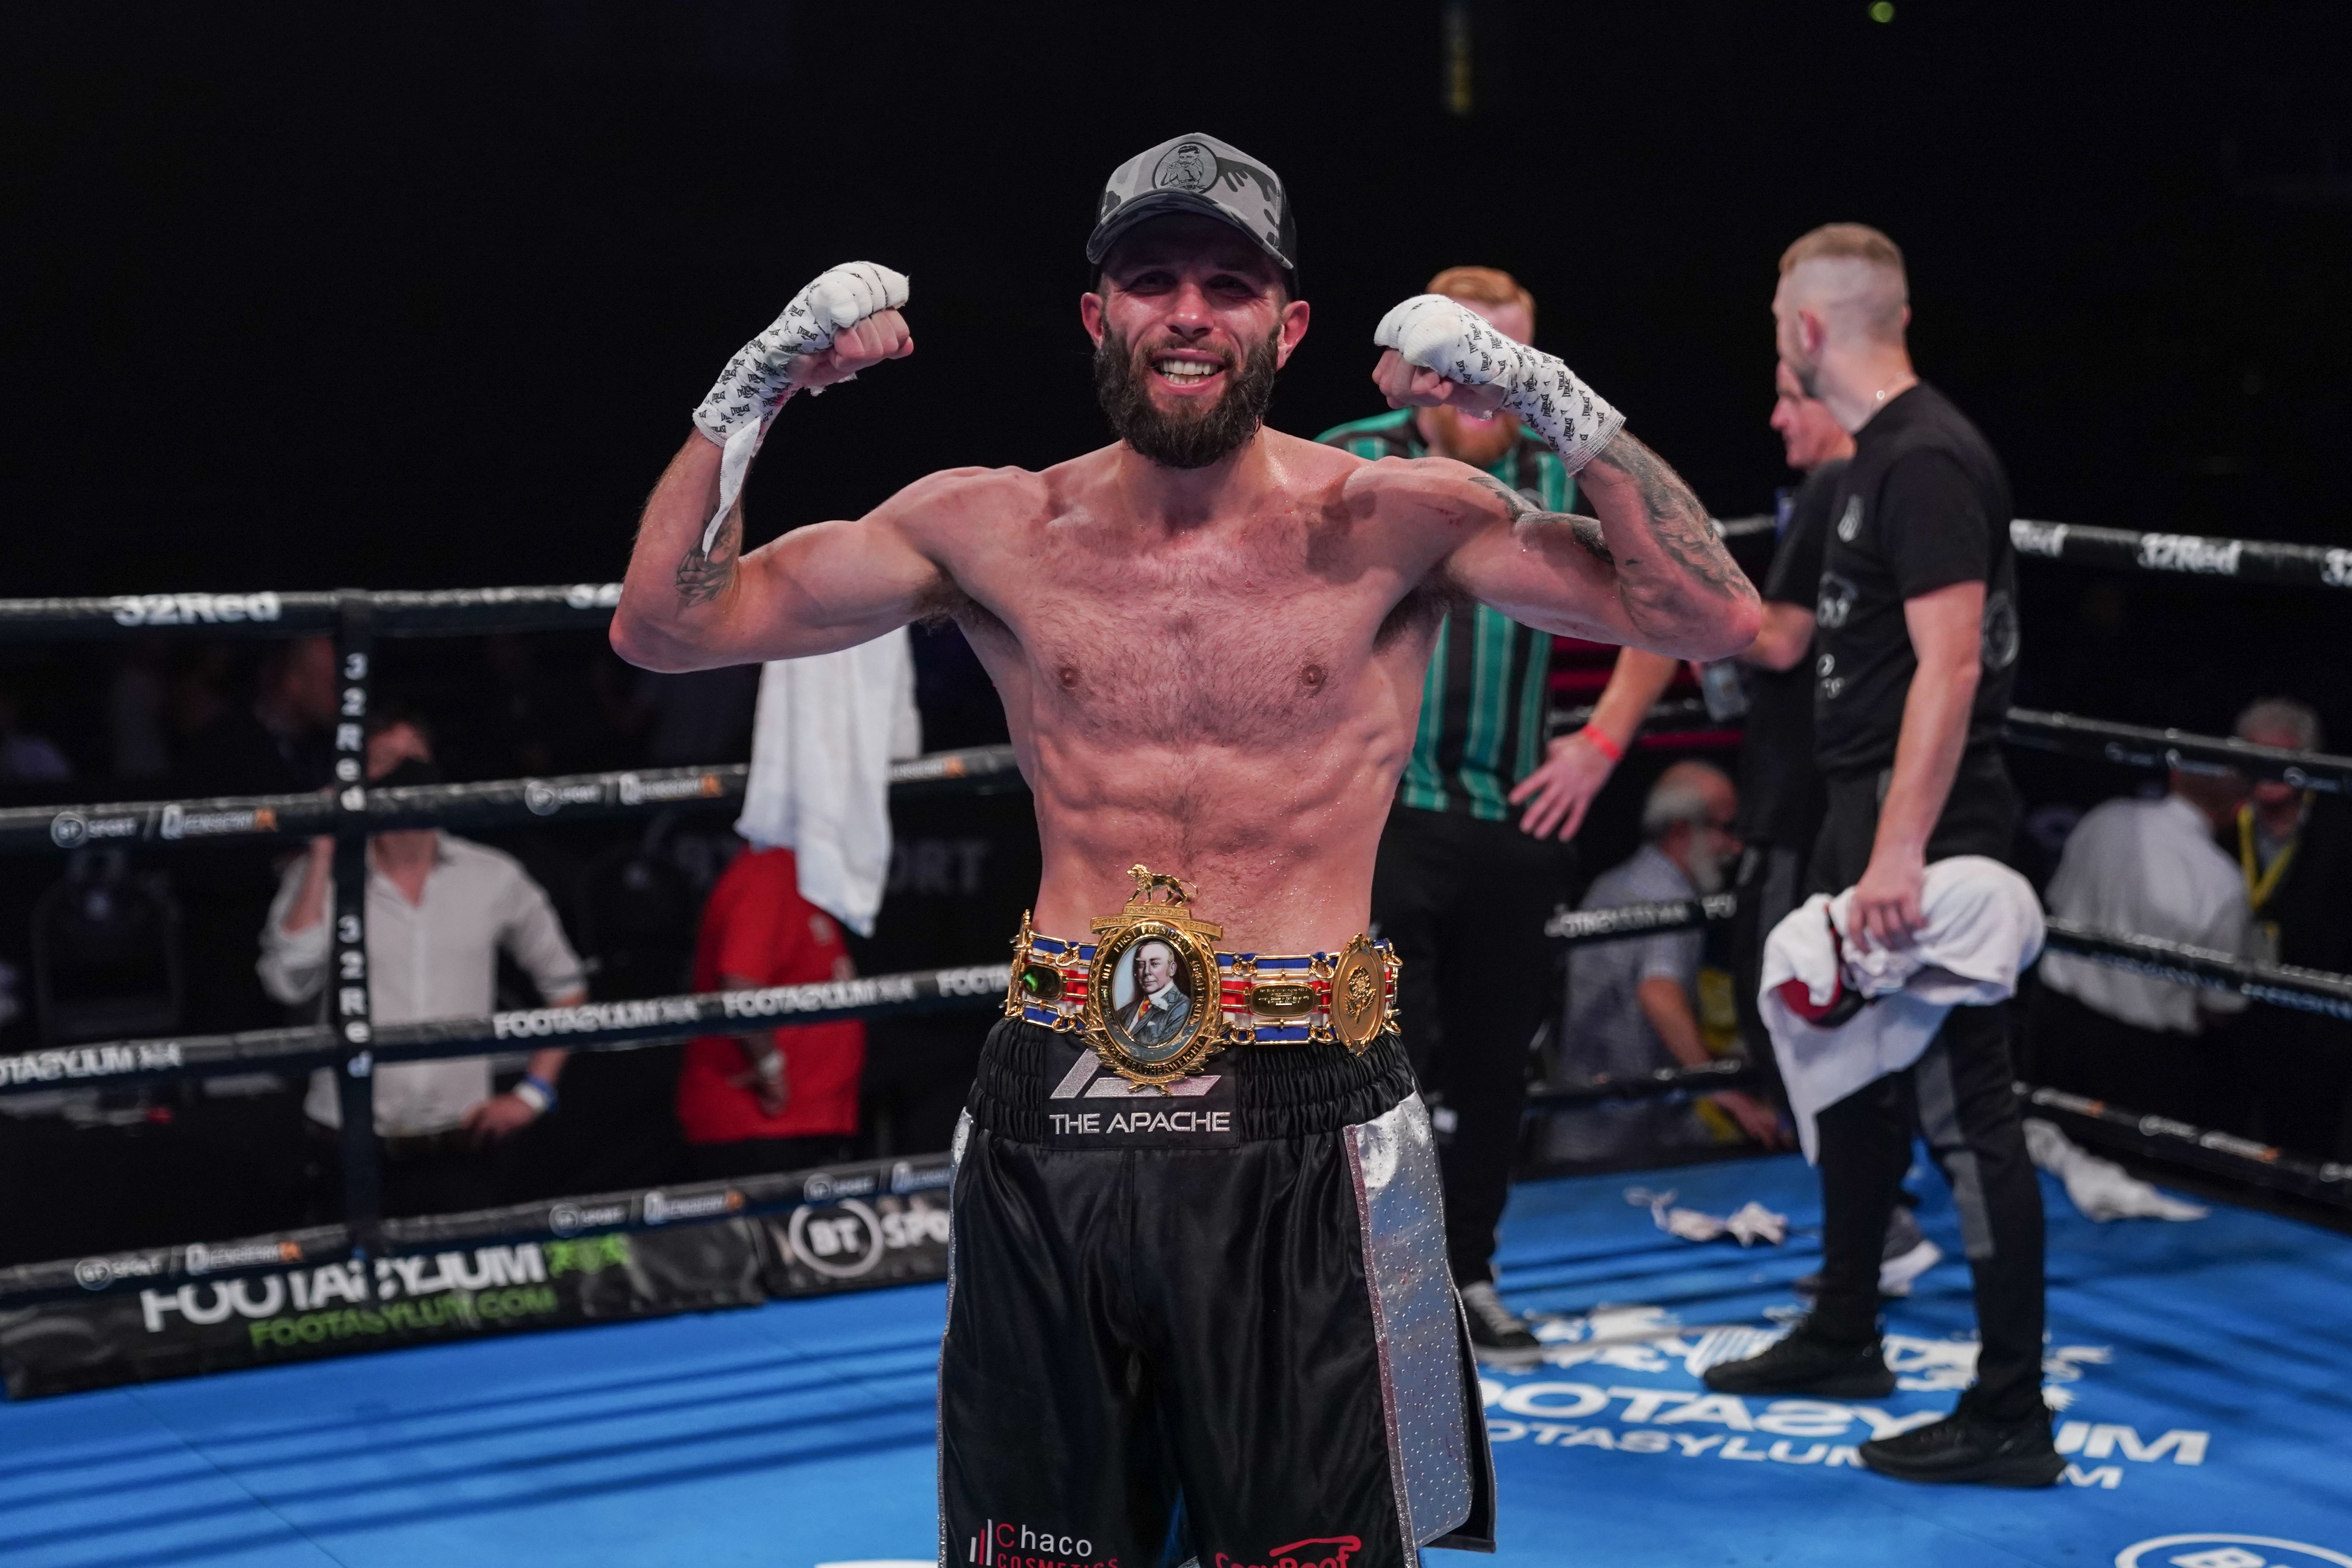 Anthony Cacace will challenge Michael Magnesi for the IBO super-featherweight title in Manchester on September 24